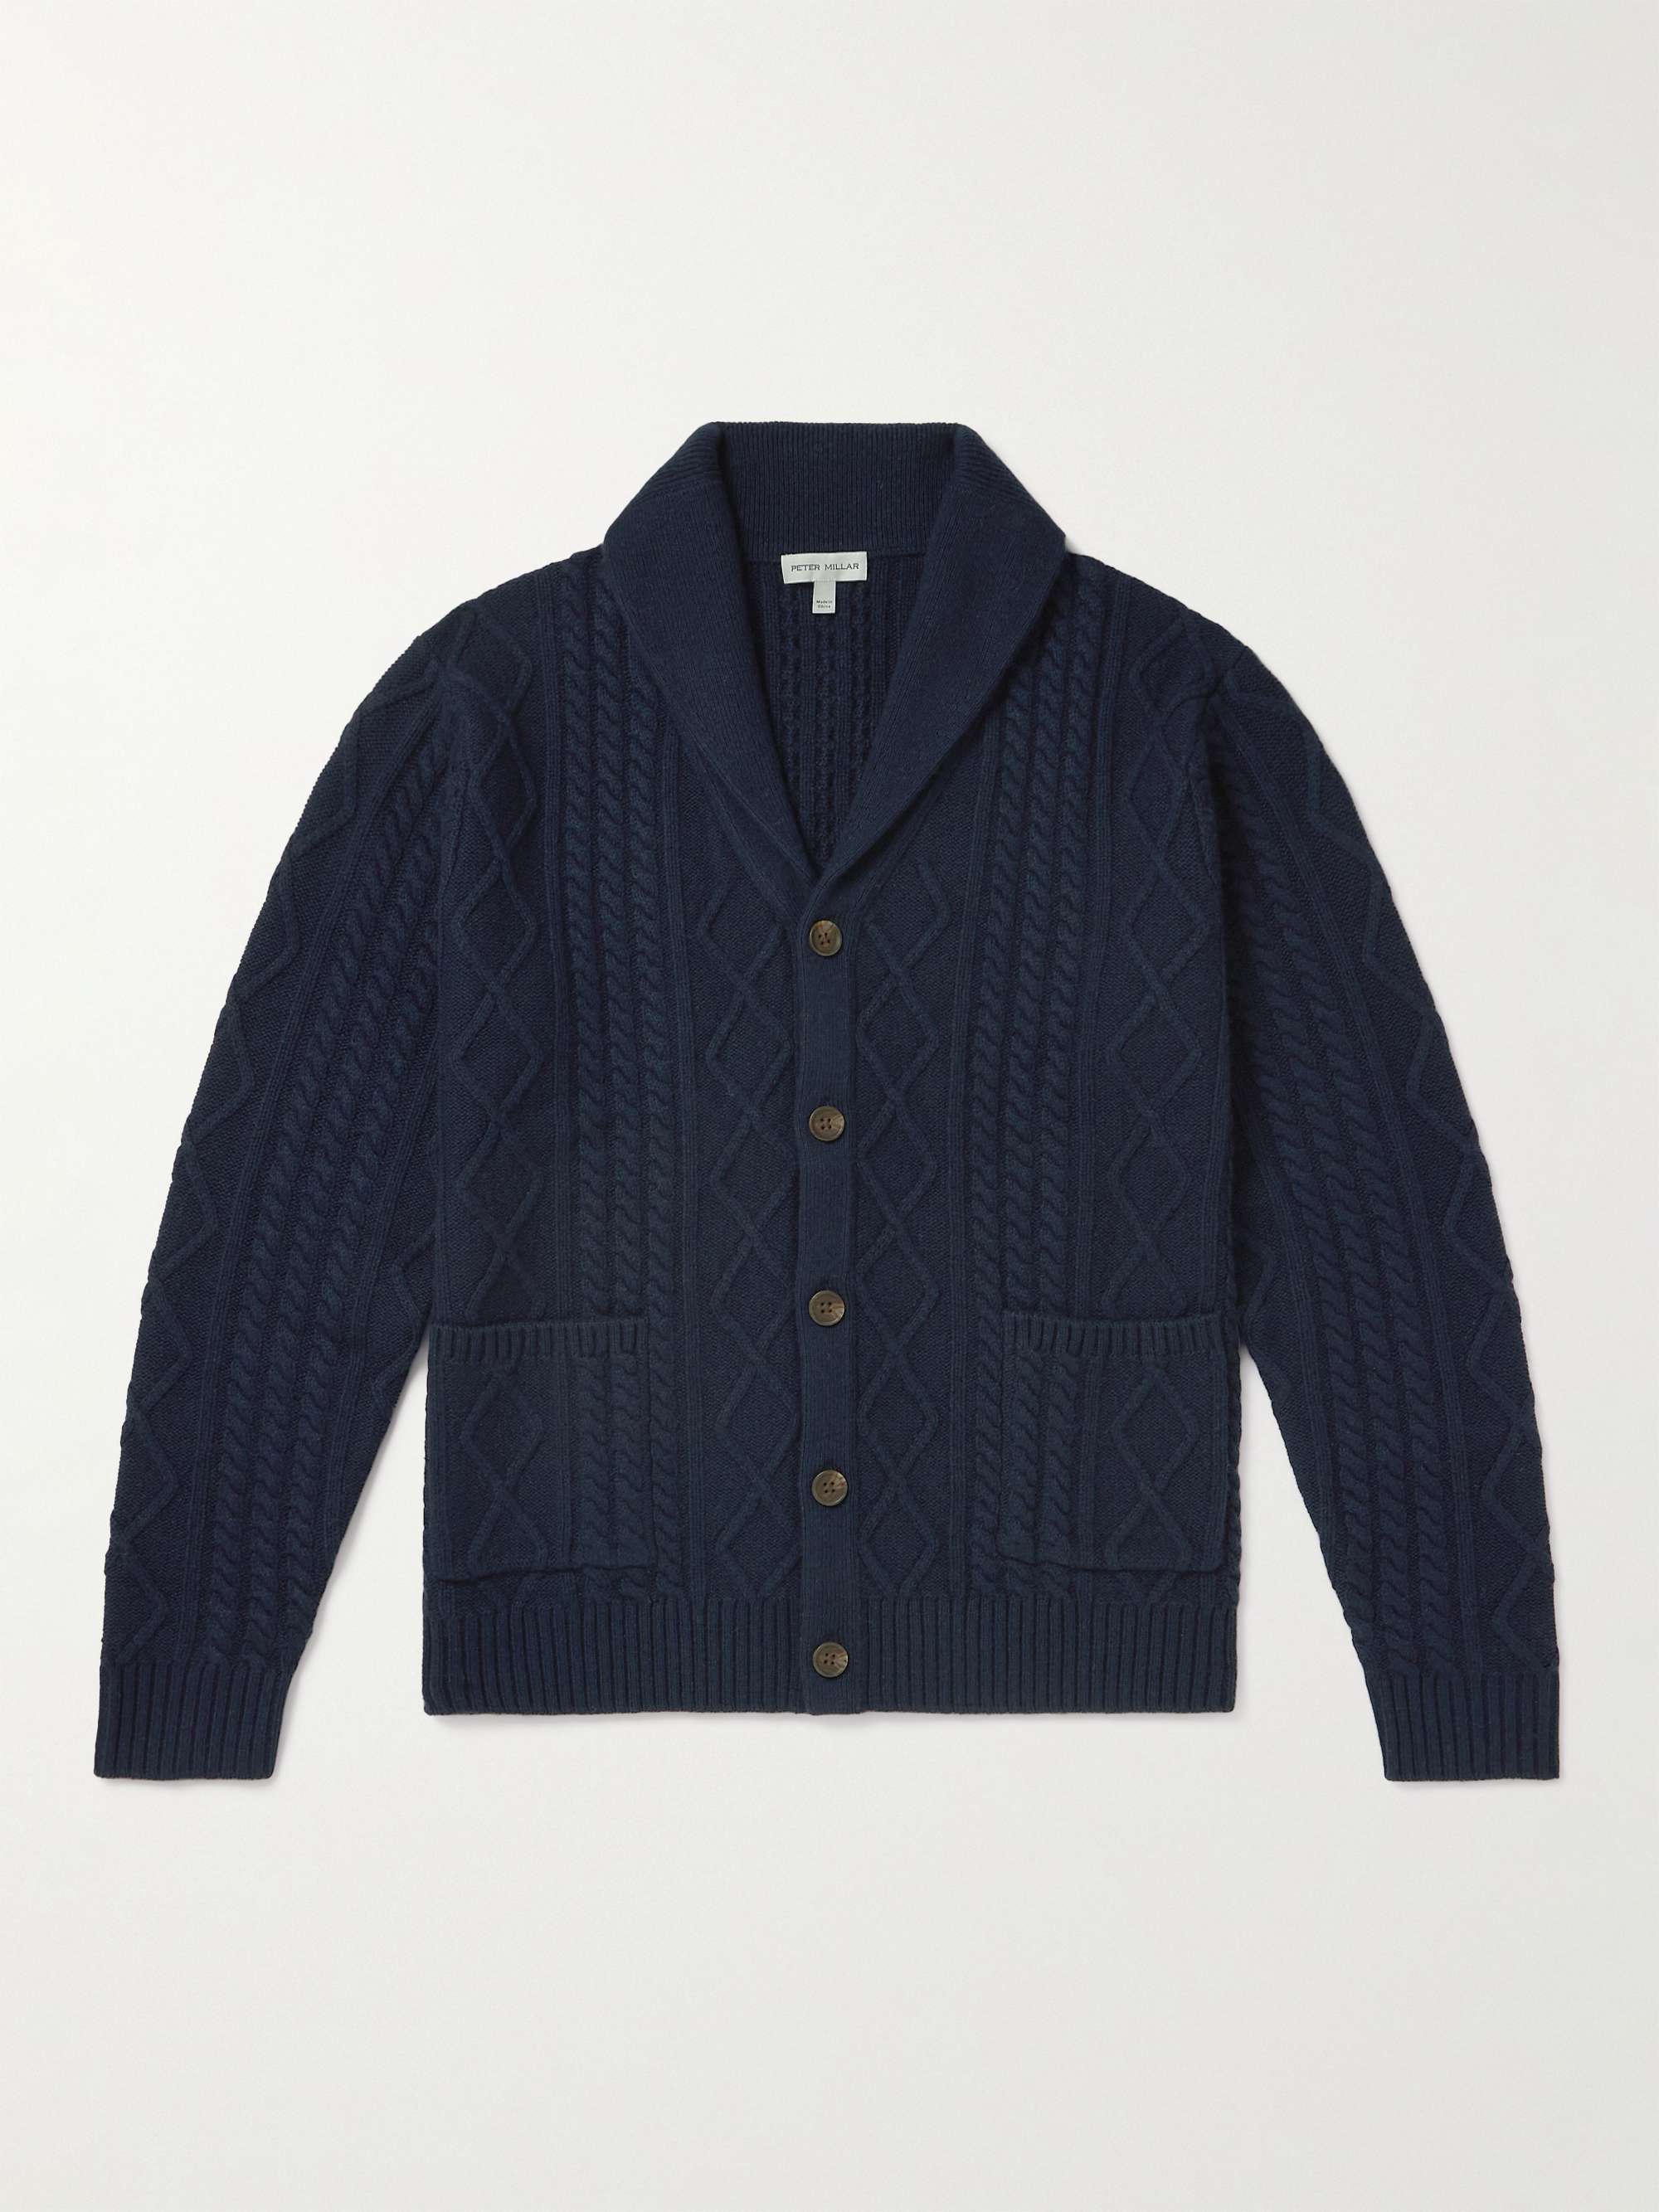 PETER MILLAR Shawl-Collar Cable-Knit Wool, Yak and Cashmere-Blend ...